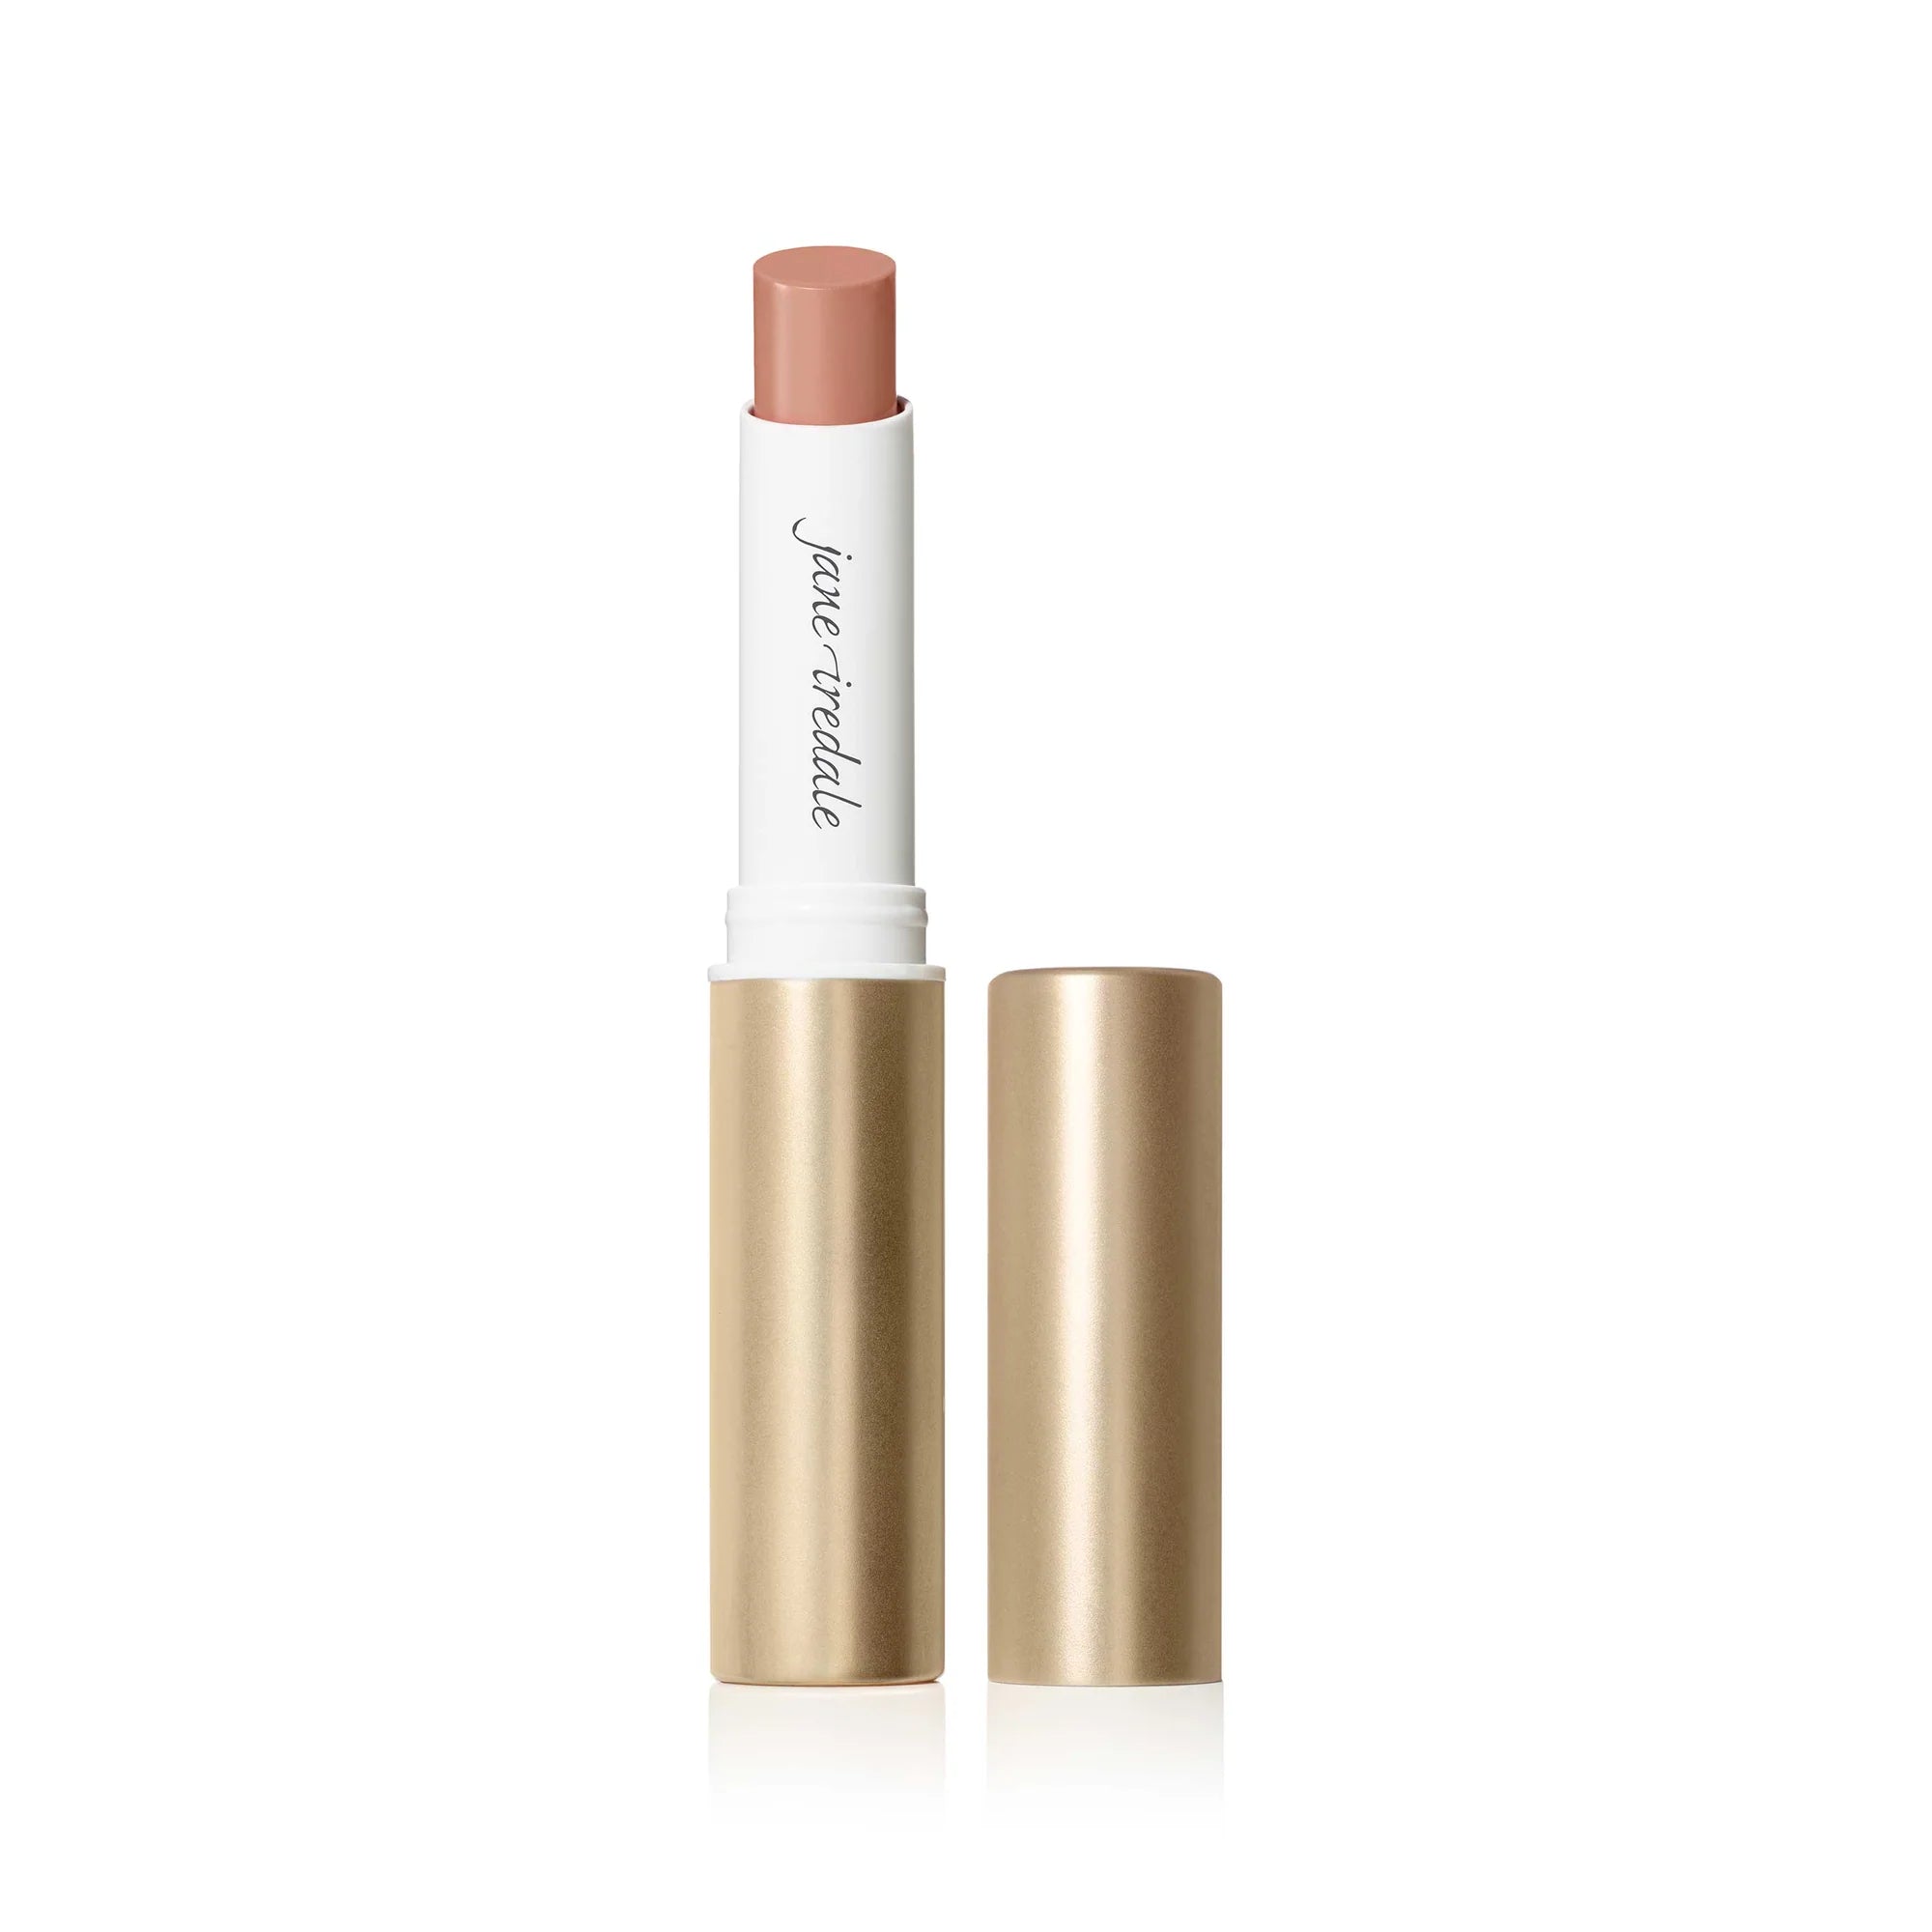 Jane Iredale's ColorLuxe Hydrating Cream Lipstick soldier